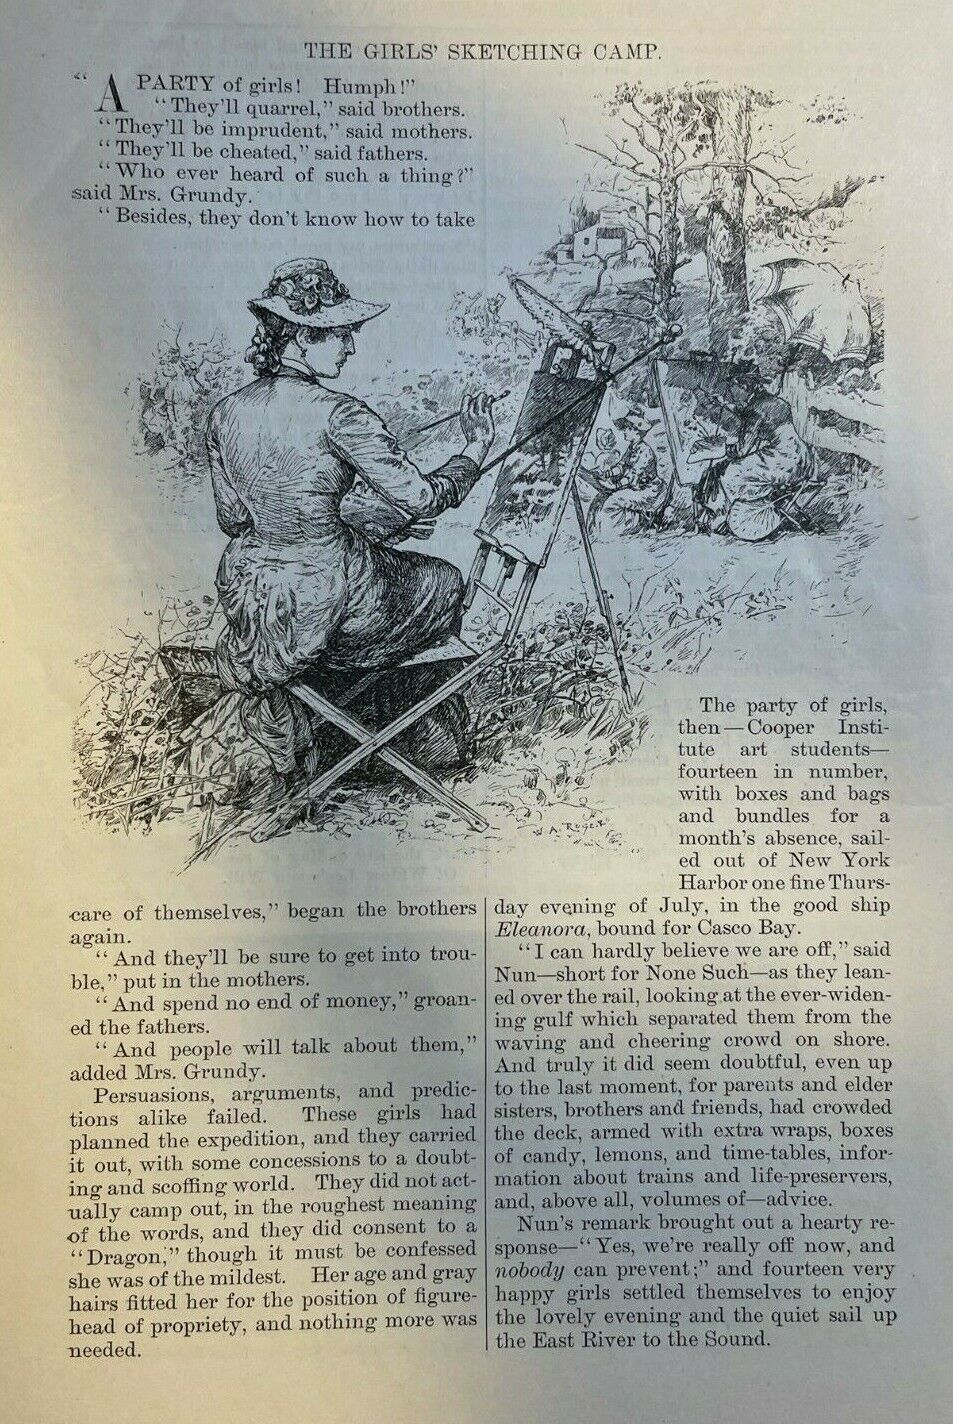 1881 Cooper Institute Girls Sketching Camp at Casco Bay illustrated